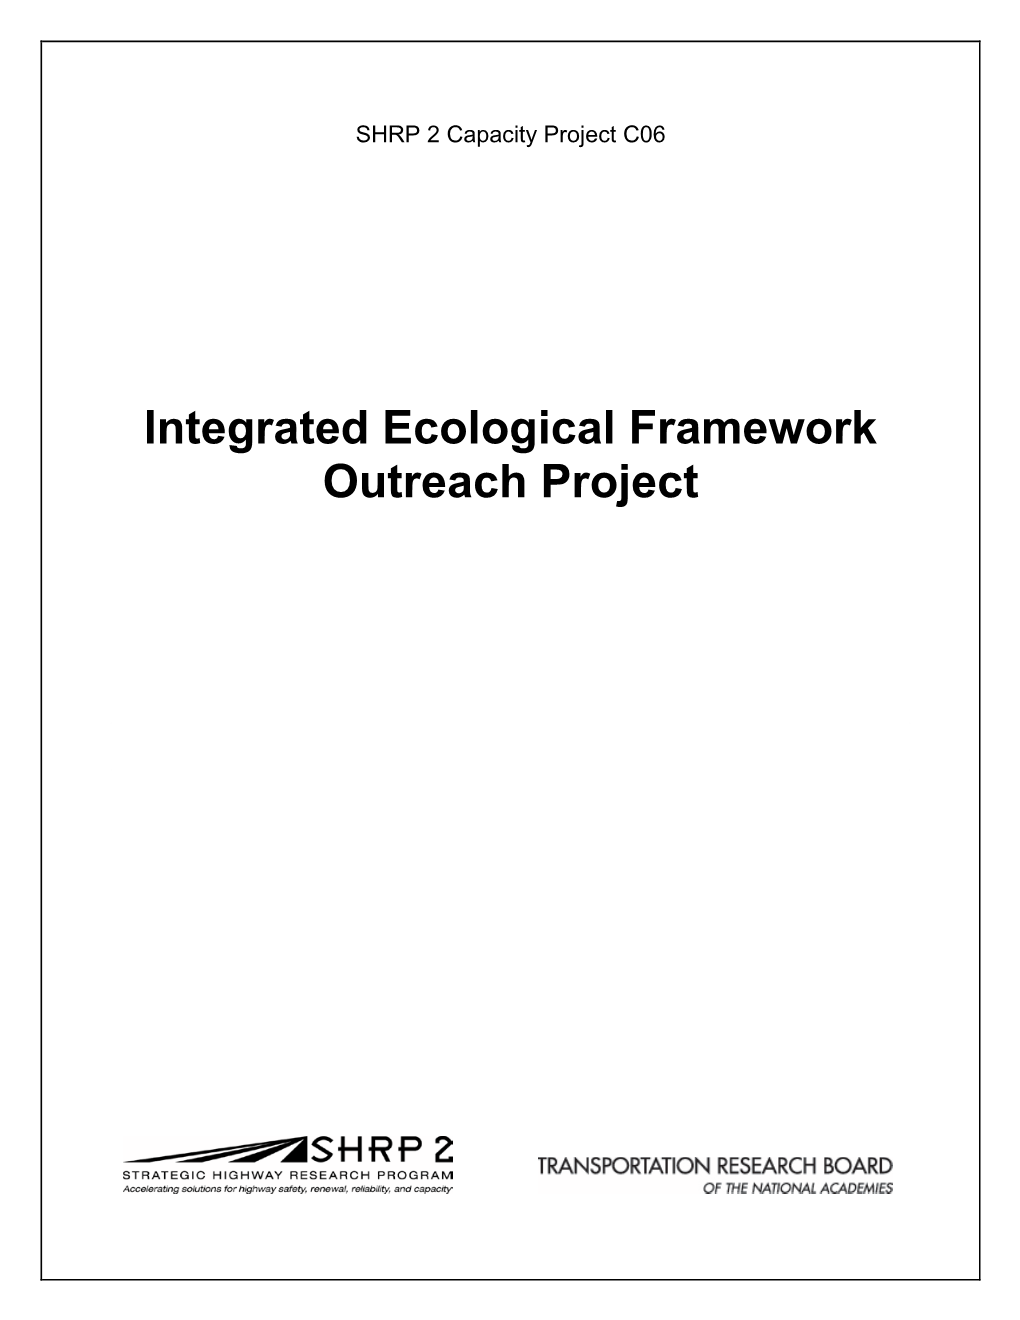 Integrated Ecological Framework Outreach Project